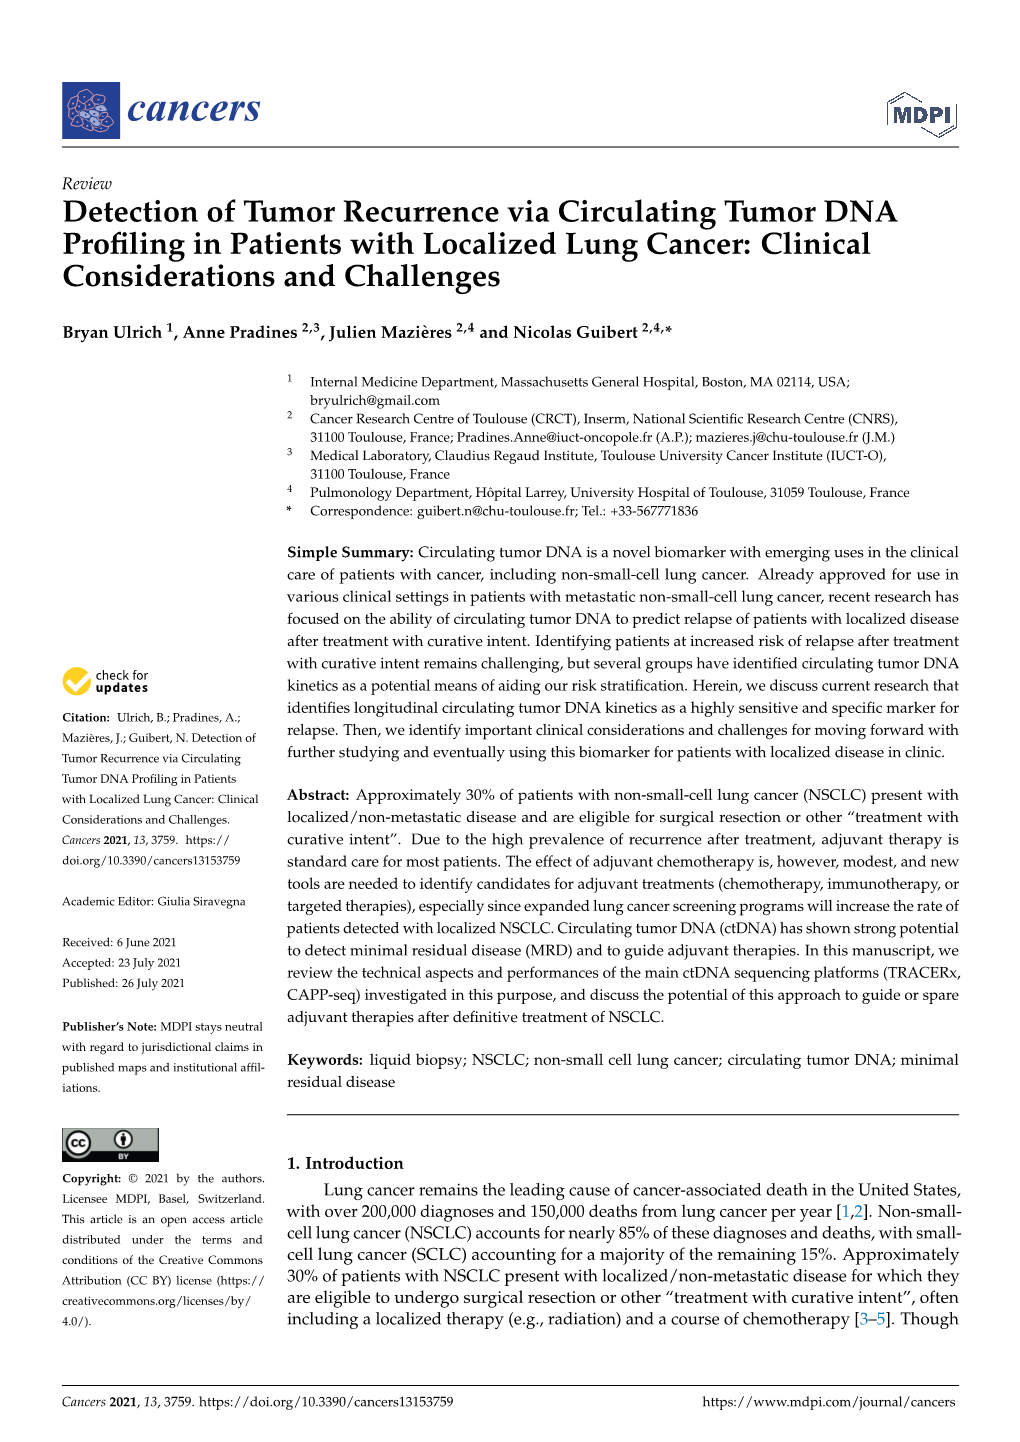 Detection of Tumor Recurrence Via Circulating Tumor DNA Proﬁling in Patients with Localized Lung Cancer: Clinical Considerations and Challenges